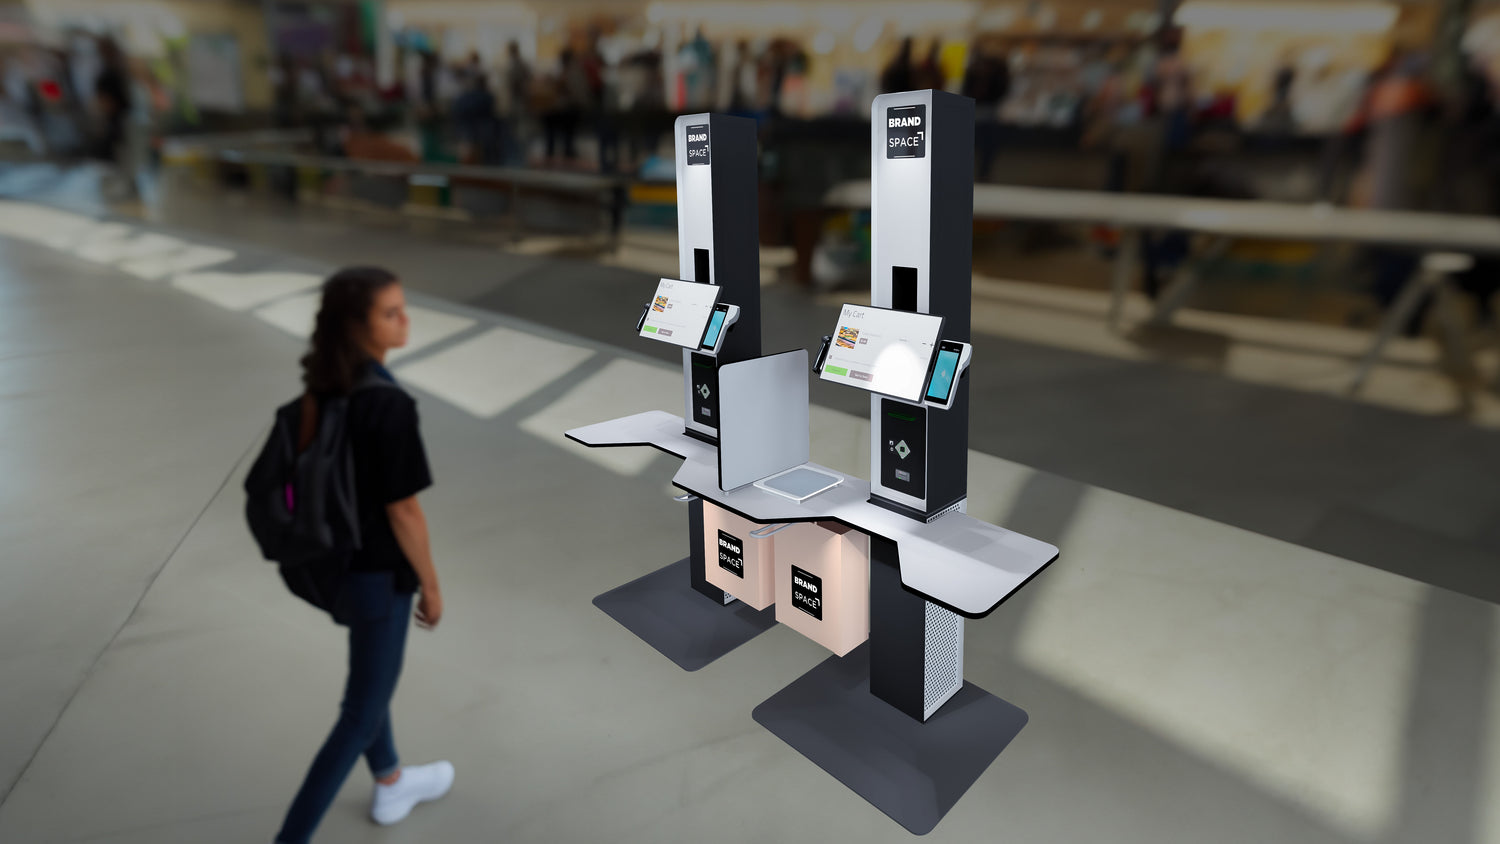 Self-Service Kiosks & How College Campuses Leverage Them